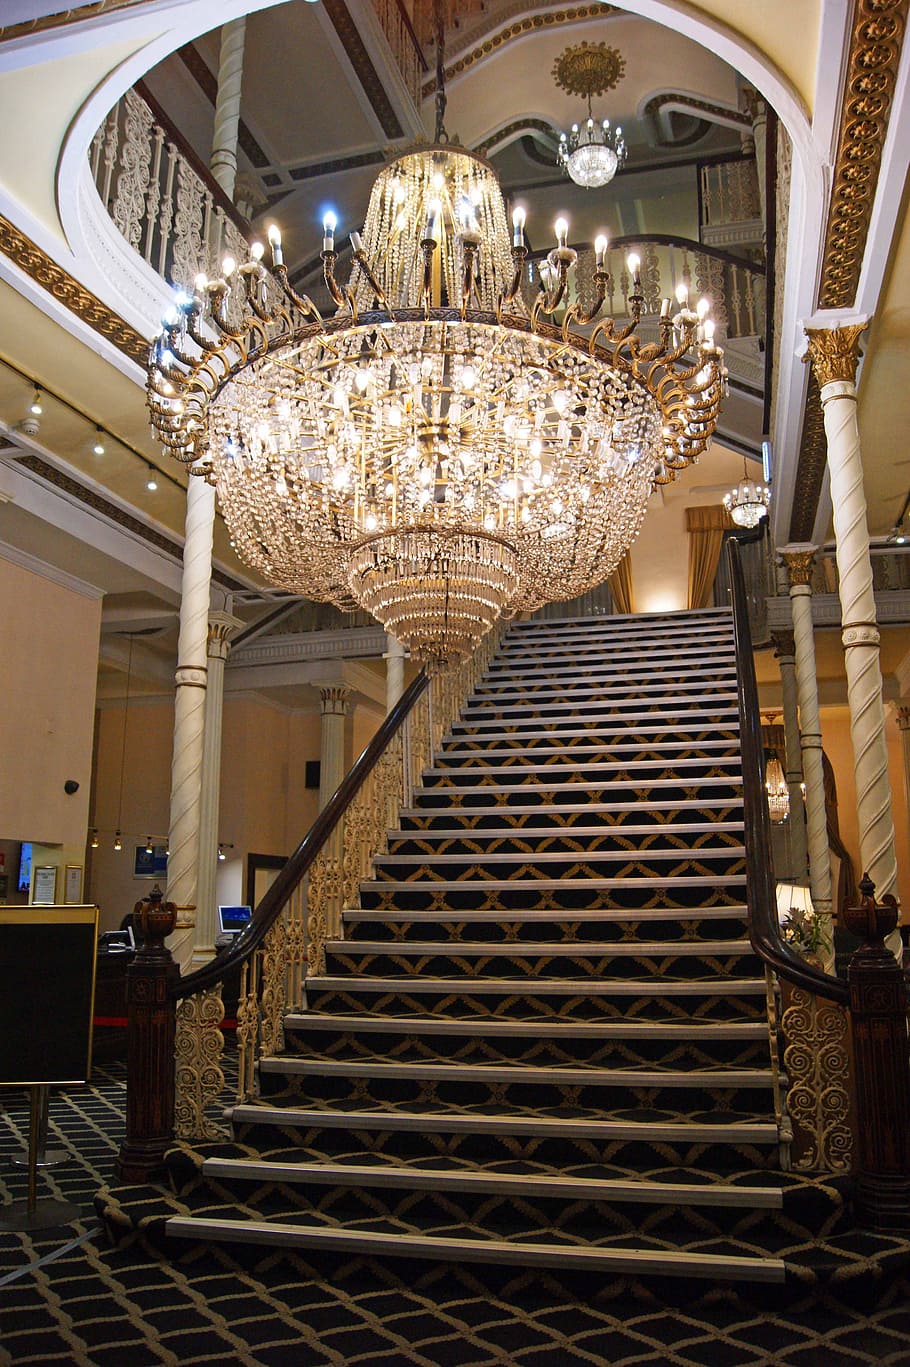 Watch, Trotters, brass-colored crystal chandelier, indoors, lighting equipment, architecture, chandelier, illuminated, staircase, built structure